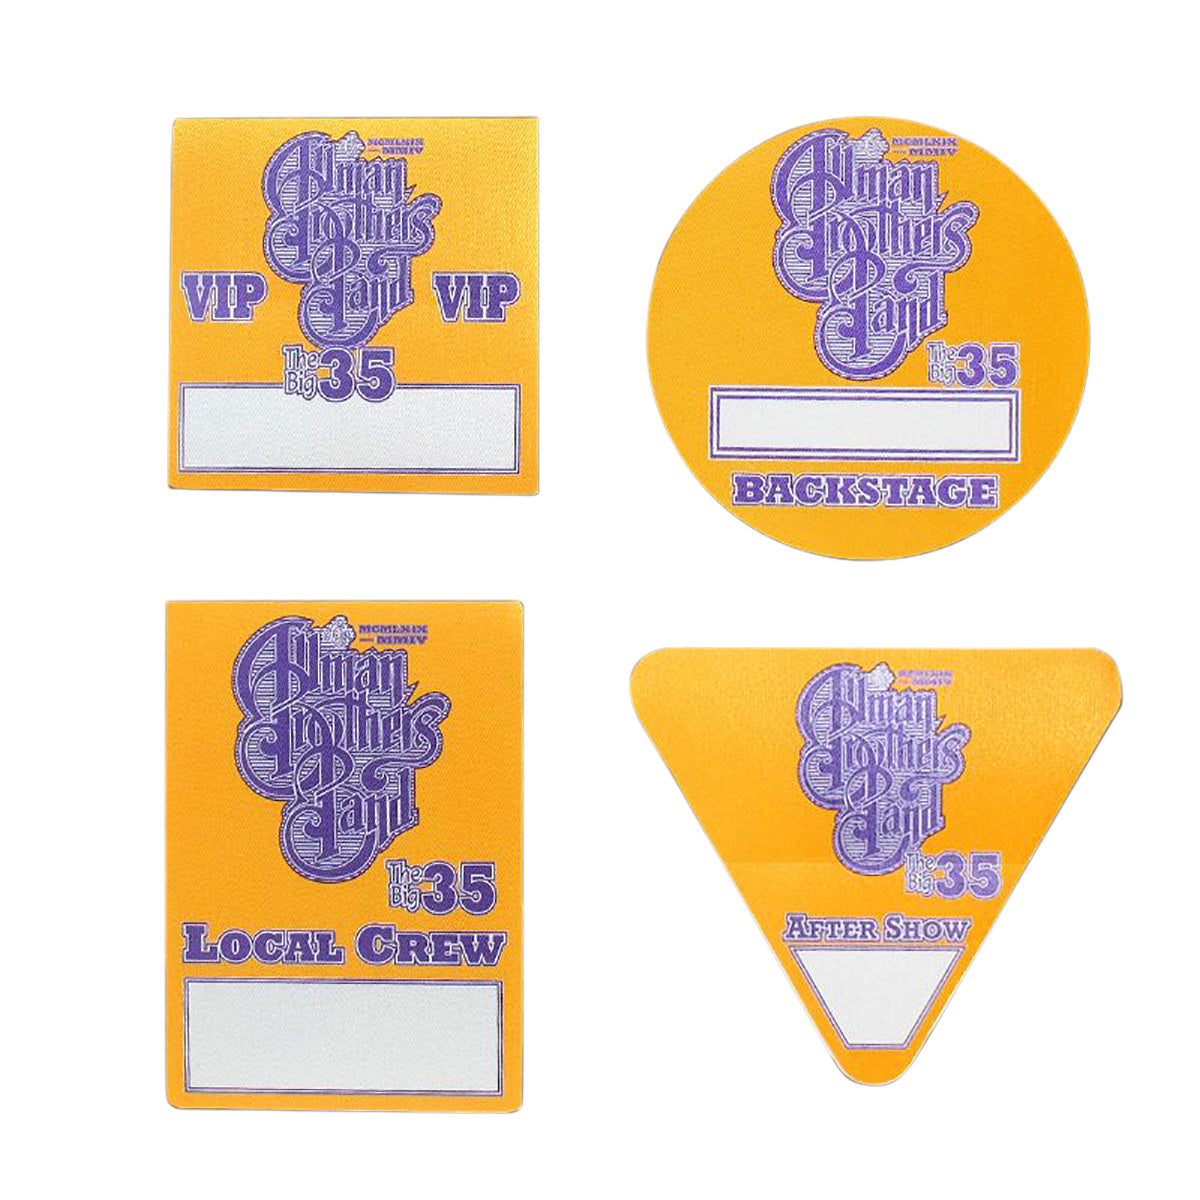 Backstage Pass Complete Set Yellow